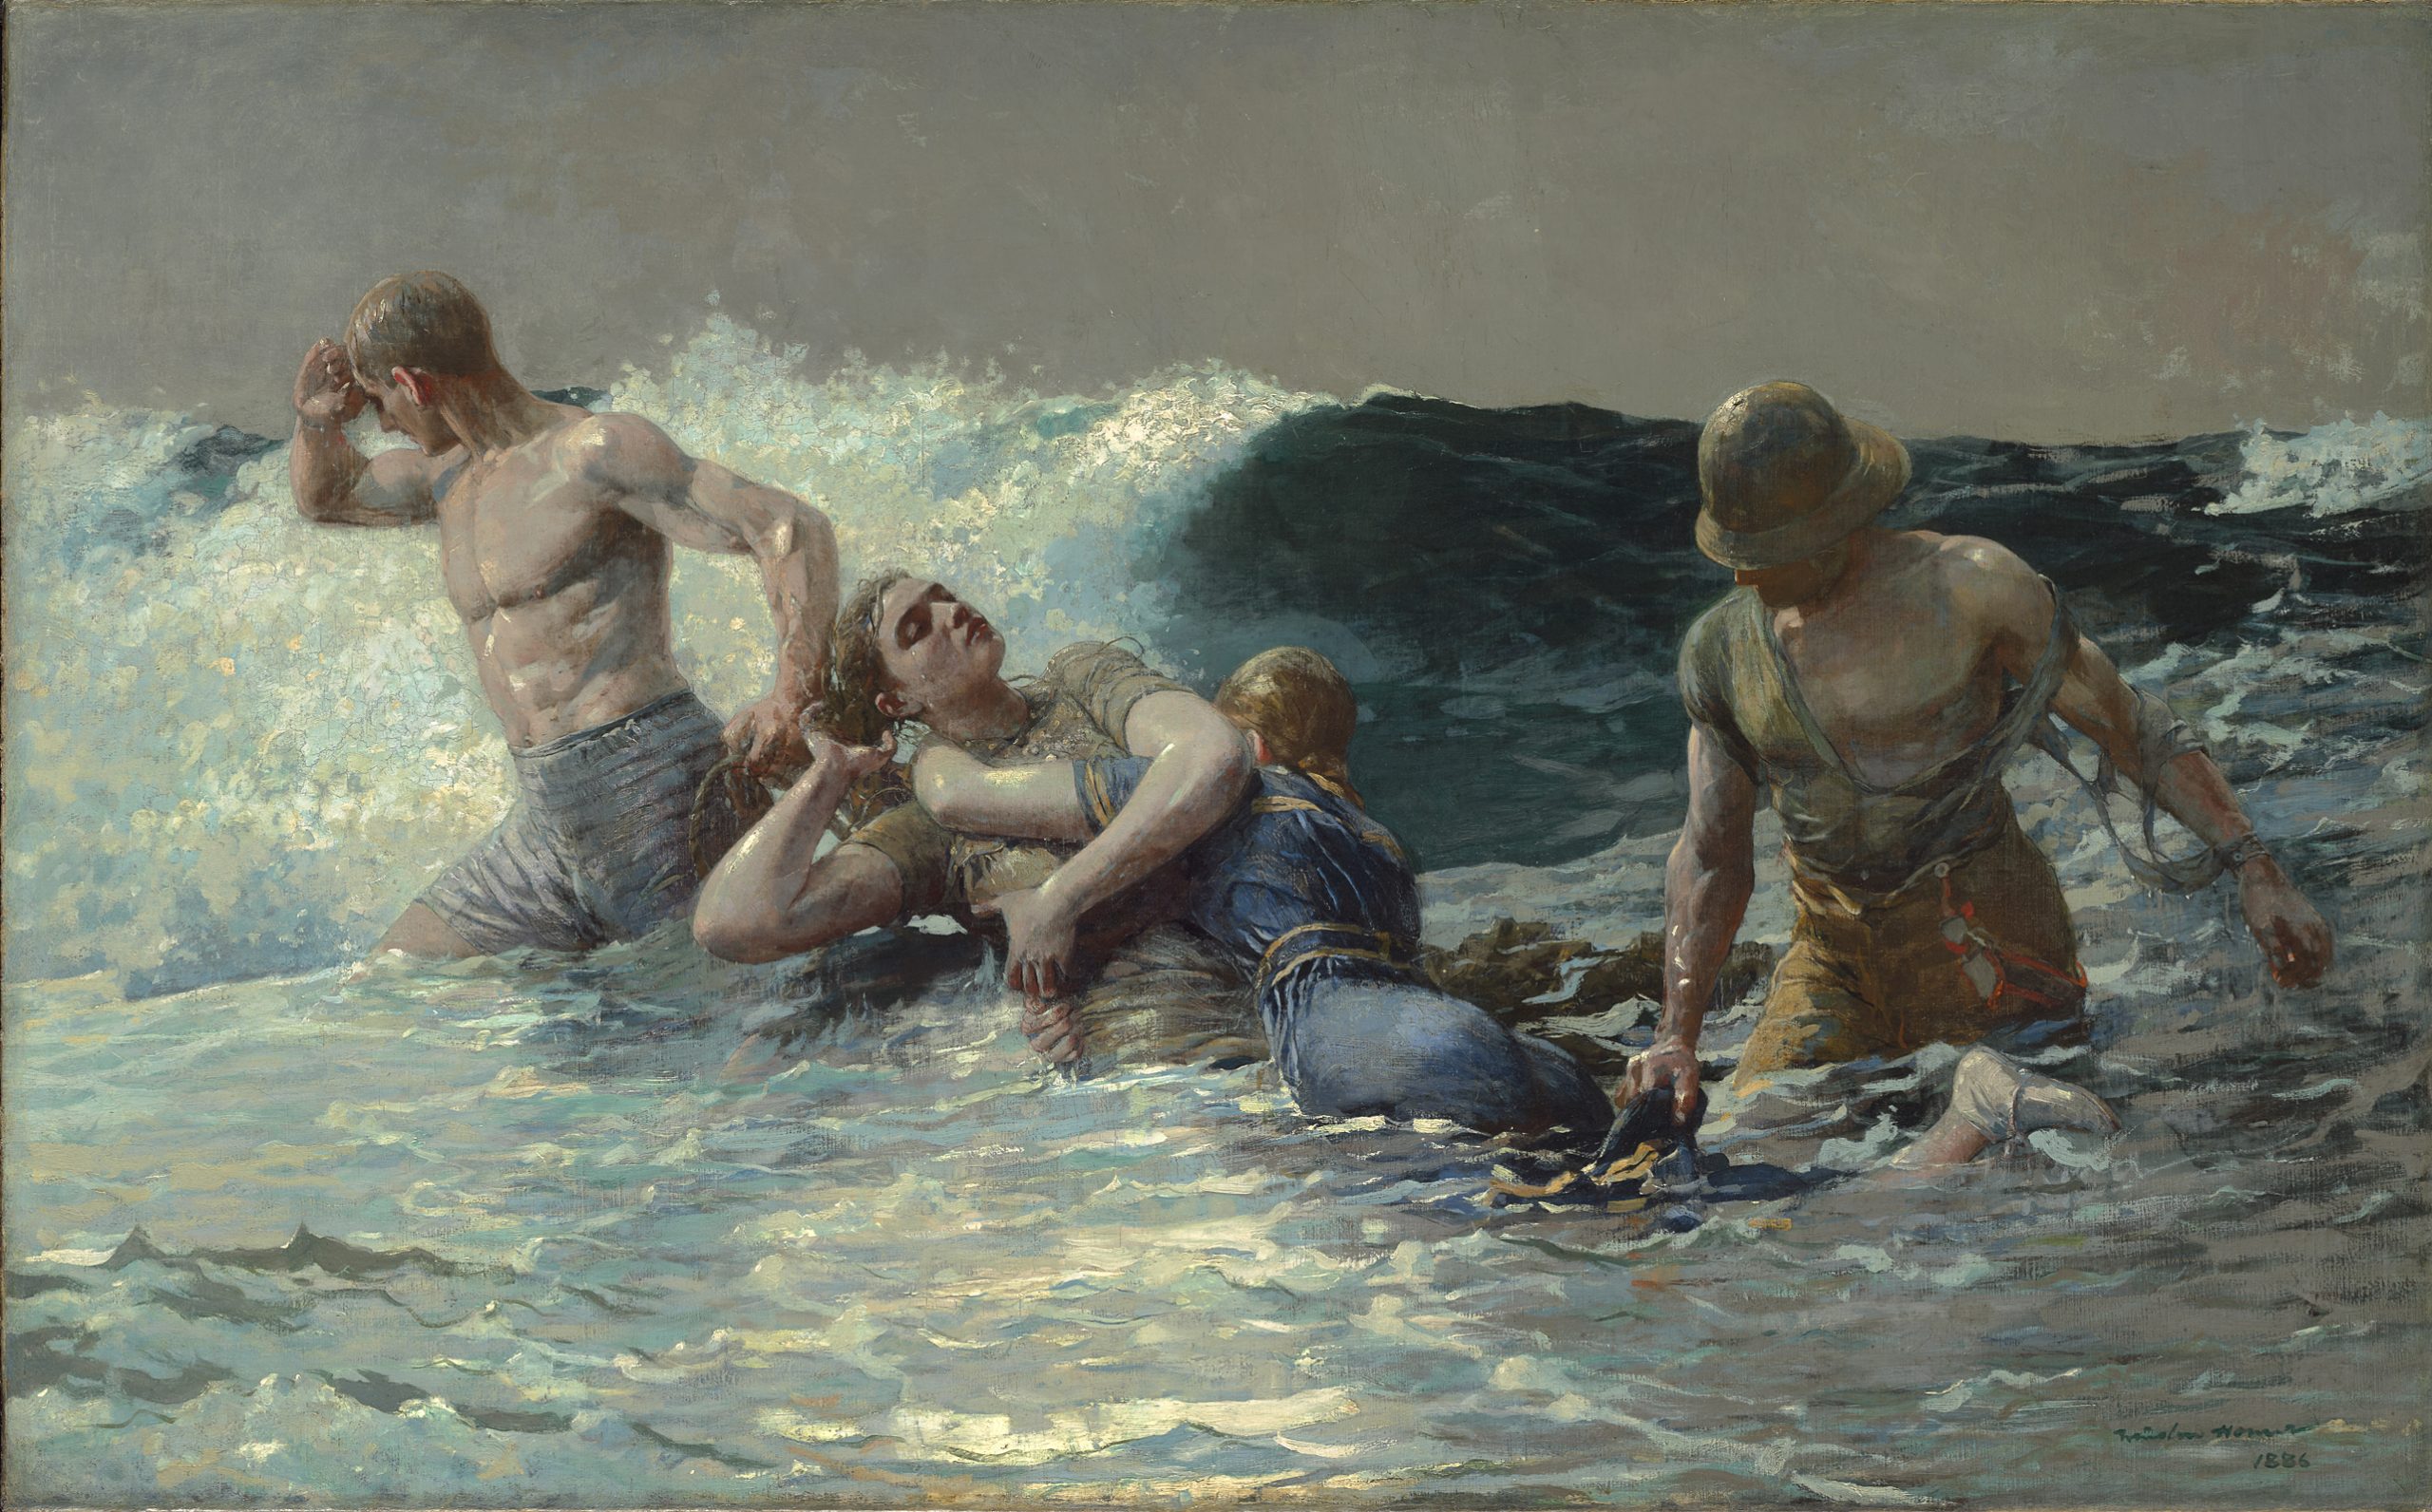 Winslow Homer Undertow, 1886, Oil on canvas, 75.7 x 121 cm, Sterling and Francine Clark Art Institute, Williamstown, Massachusetts, USA
Acquired by Sterling and Francine Clark, 1924 1955.4
© Sterling and Francine Clark Art Institute, Williamstown, Massachusetts, USA